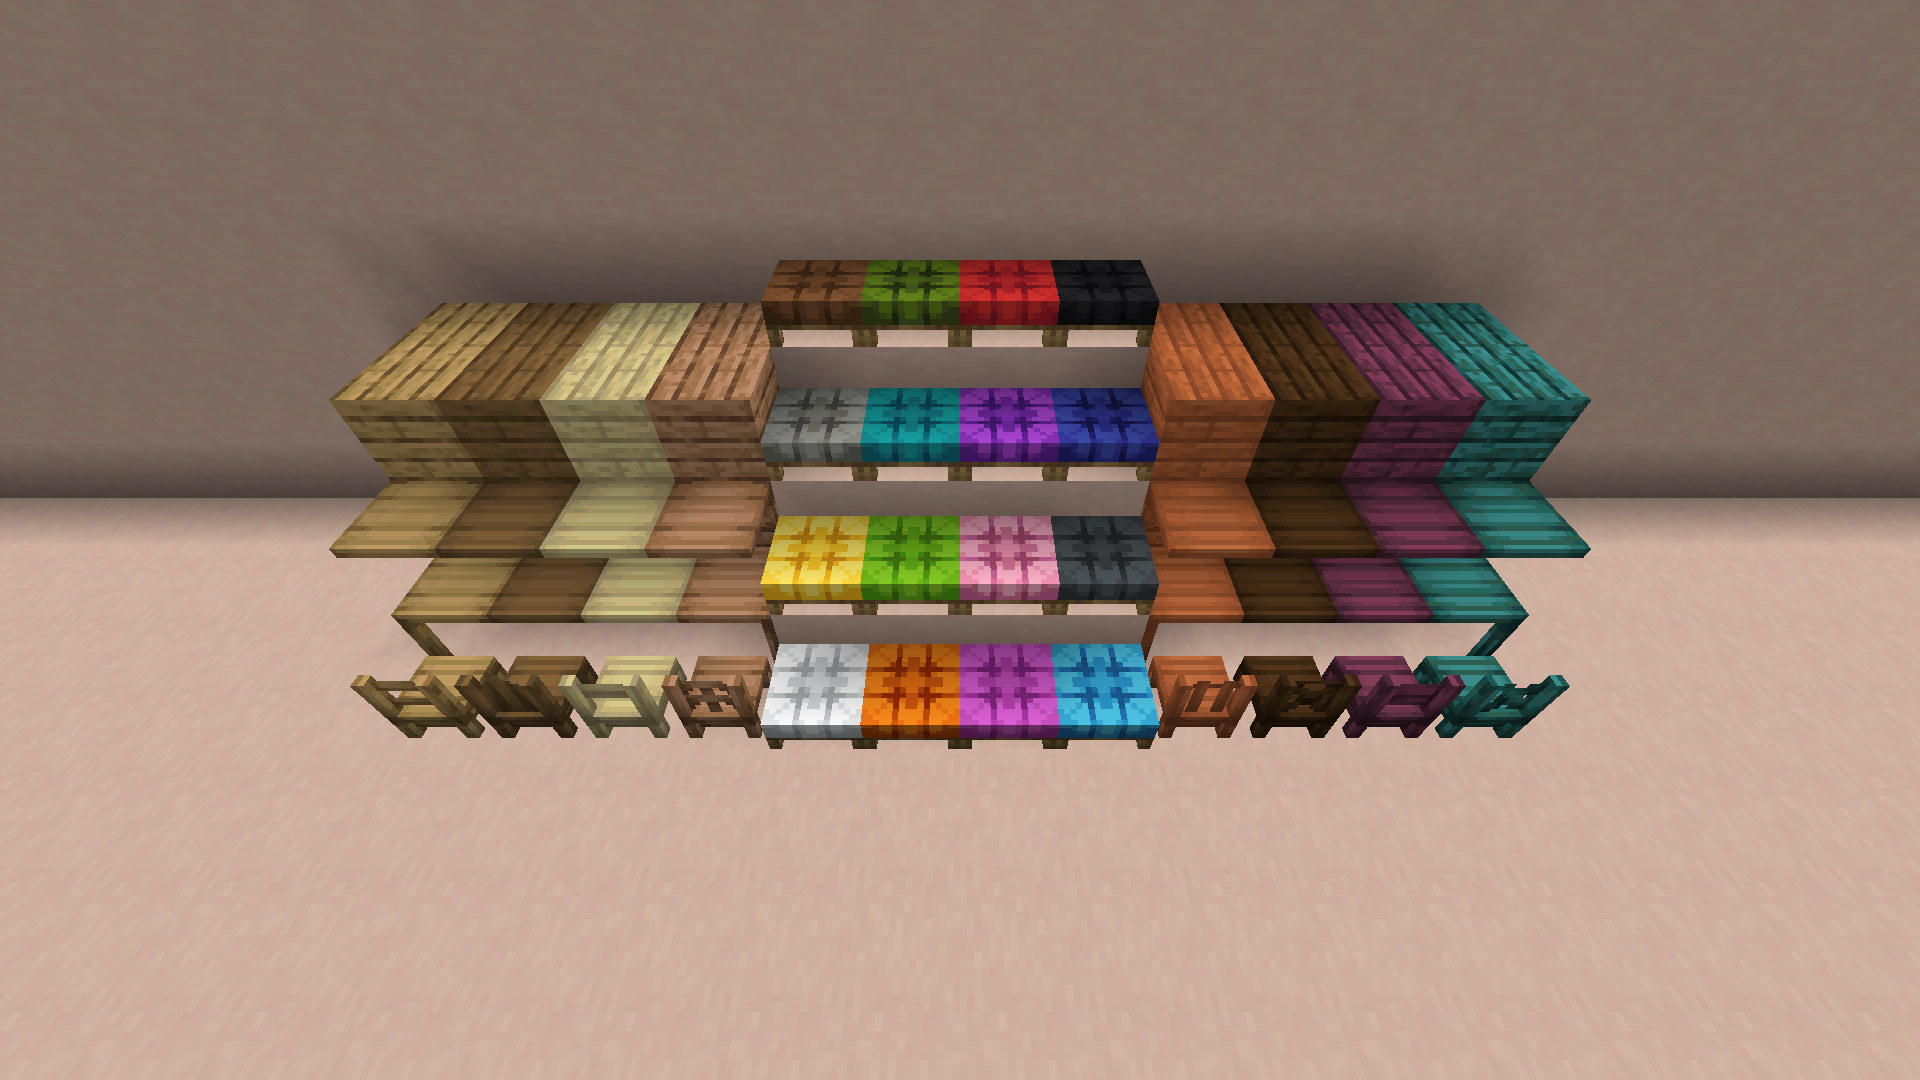 Another minecraft mod. Another Furniture майнкрафт. Another Furniture.